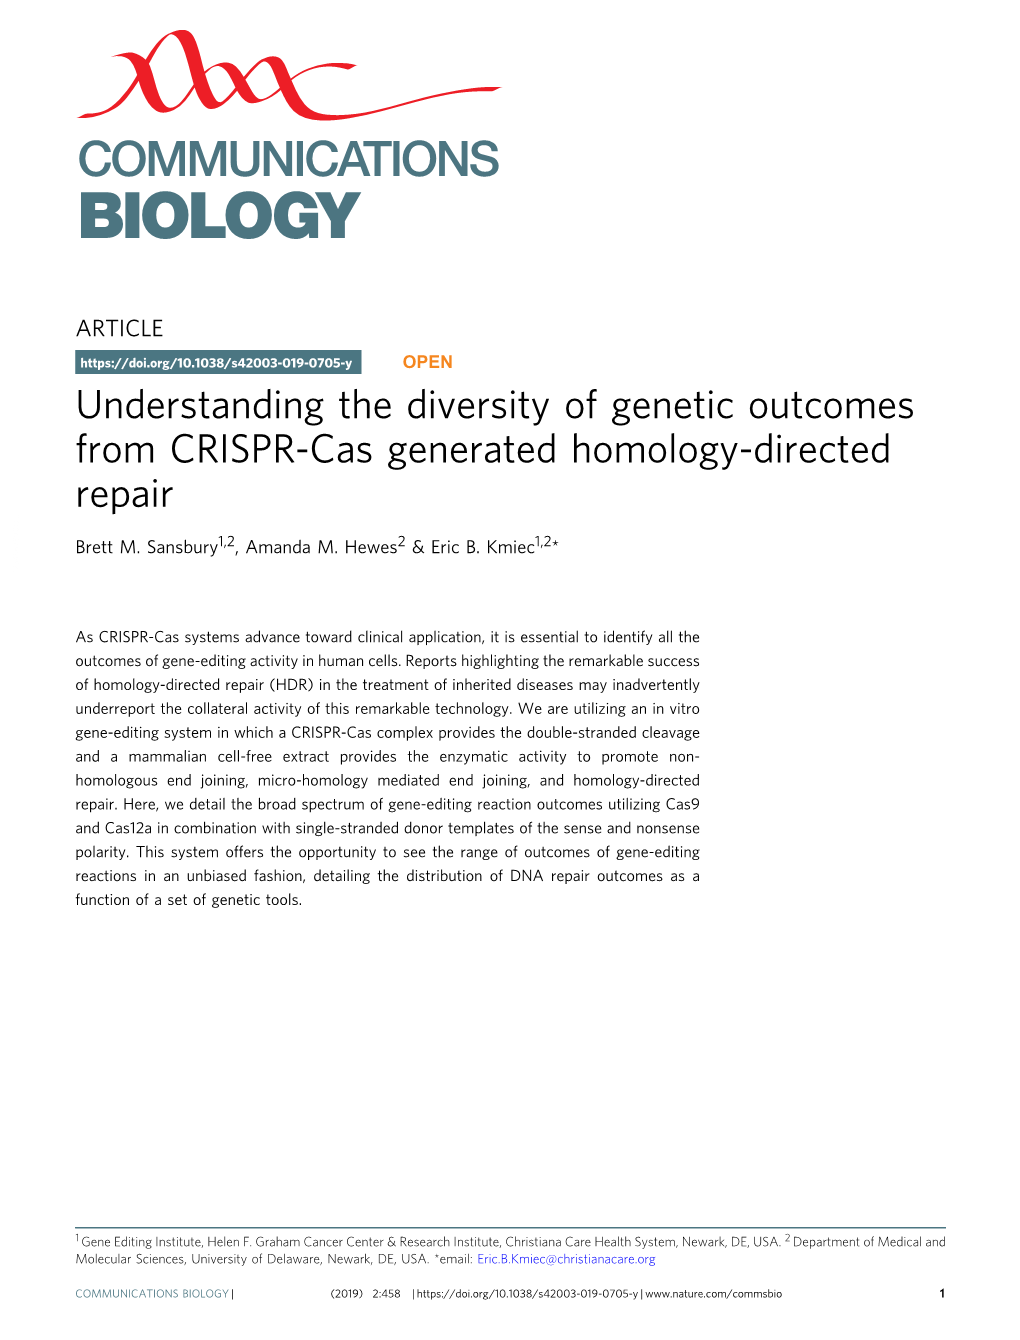 Understanding the Diversity of Genetic Outcomes from CRISPR-Cas Generated Homology-Directed Repair